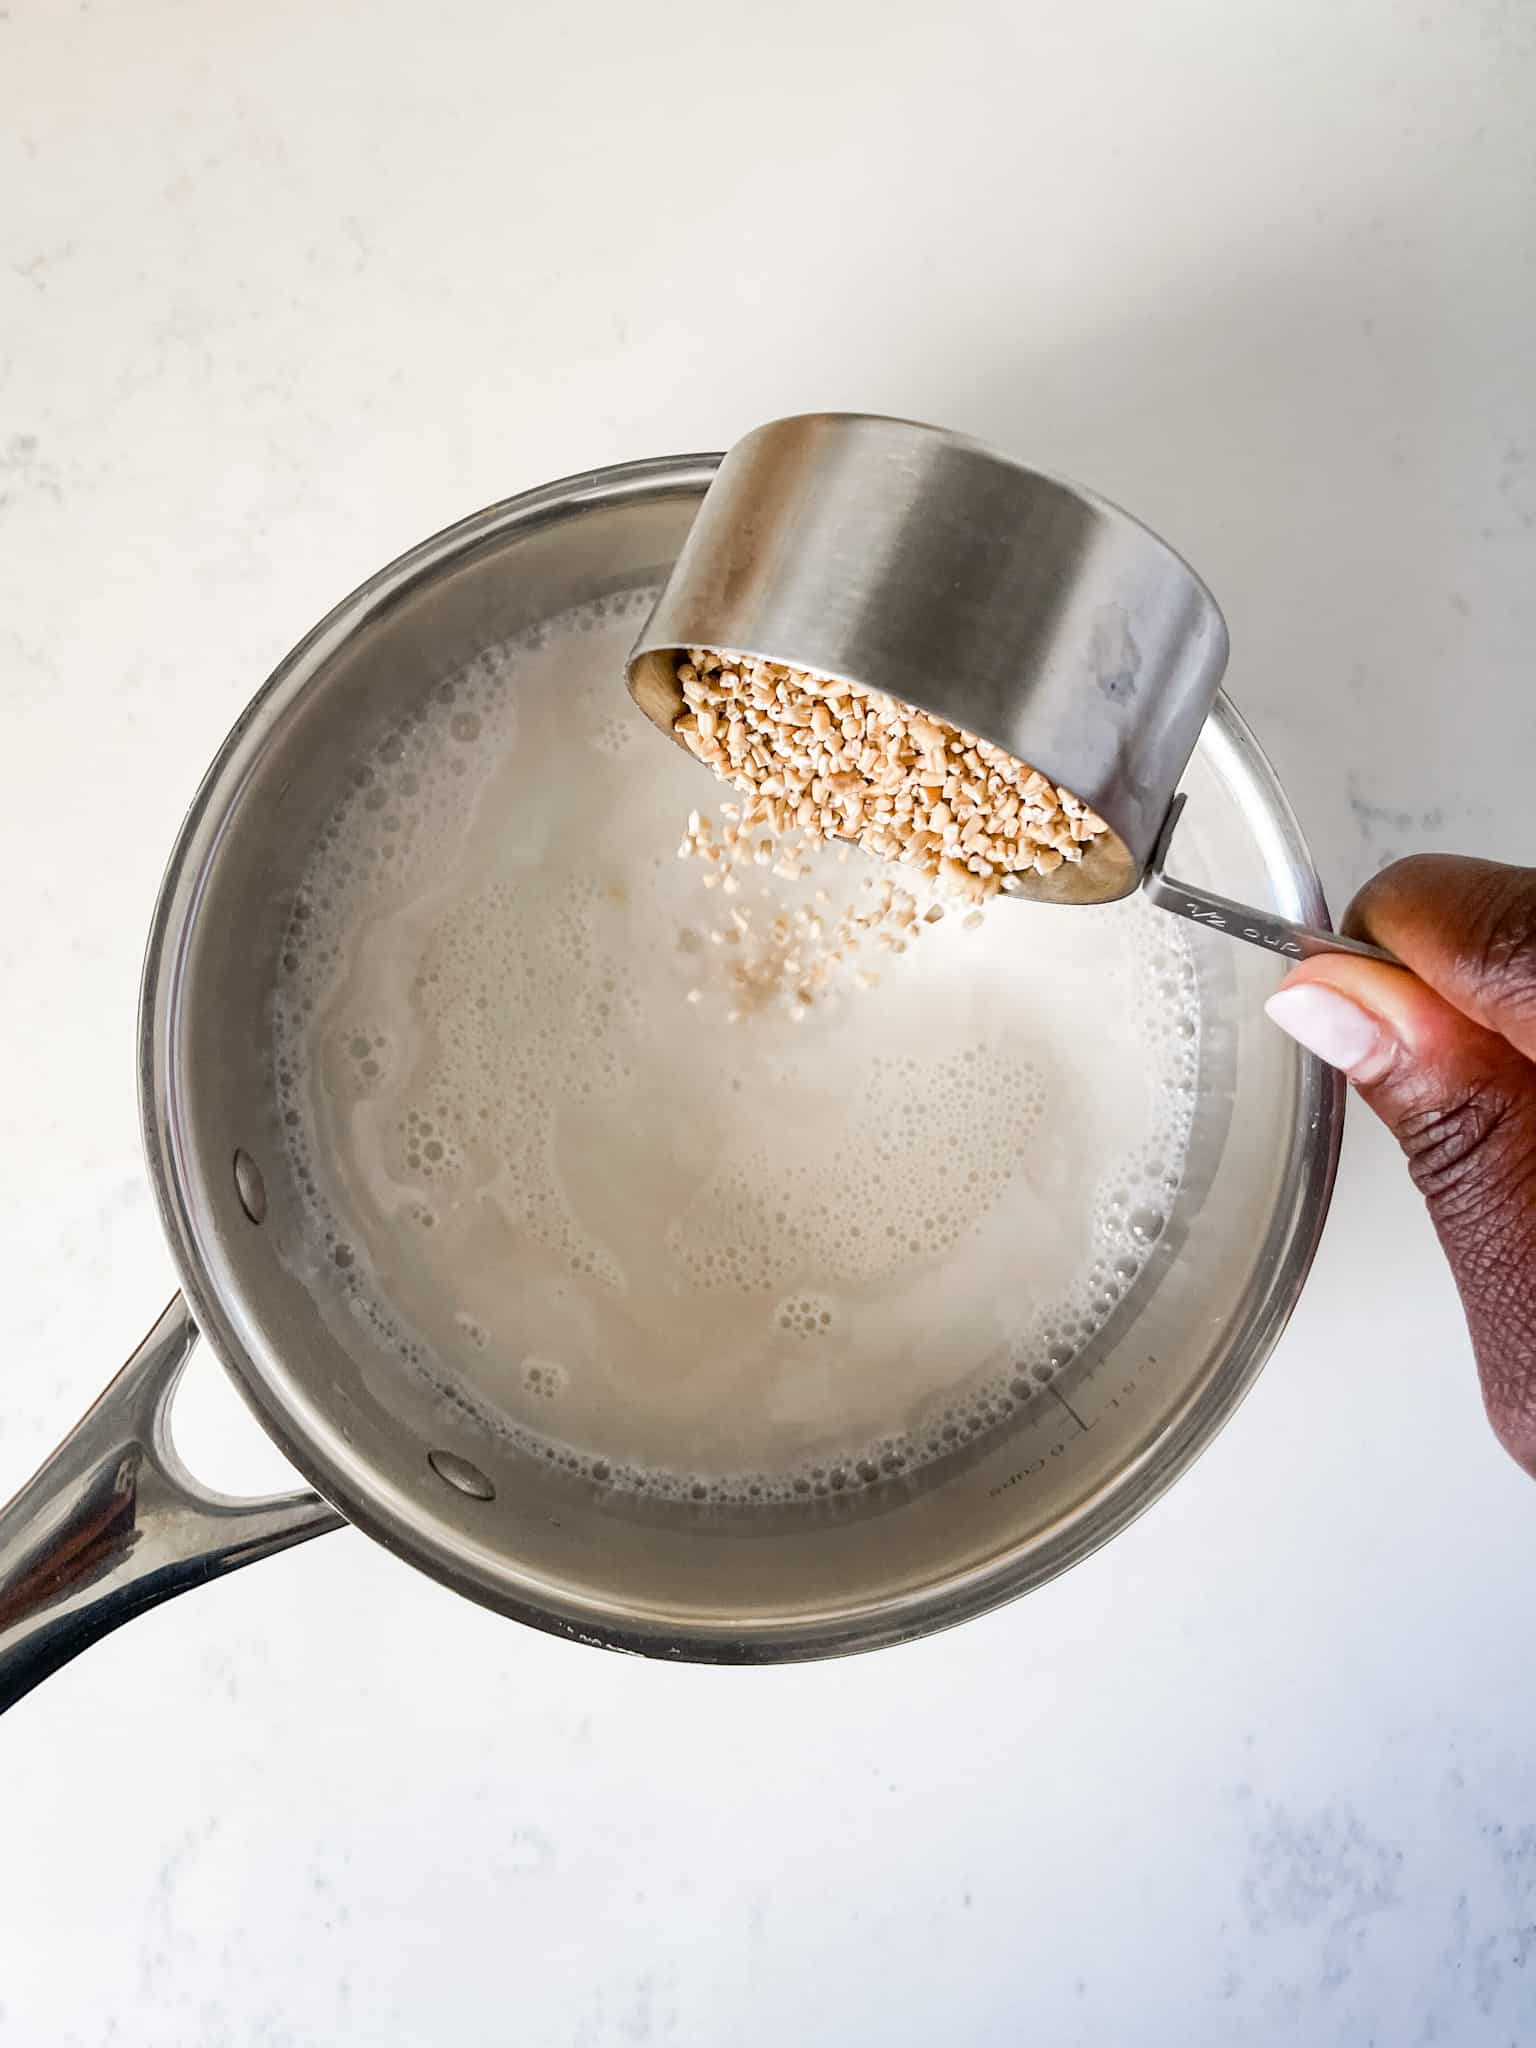 Pouring Steel Cut Oats into a saucepan with milk and water.